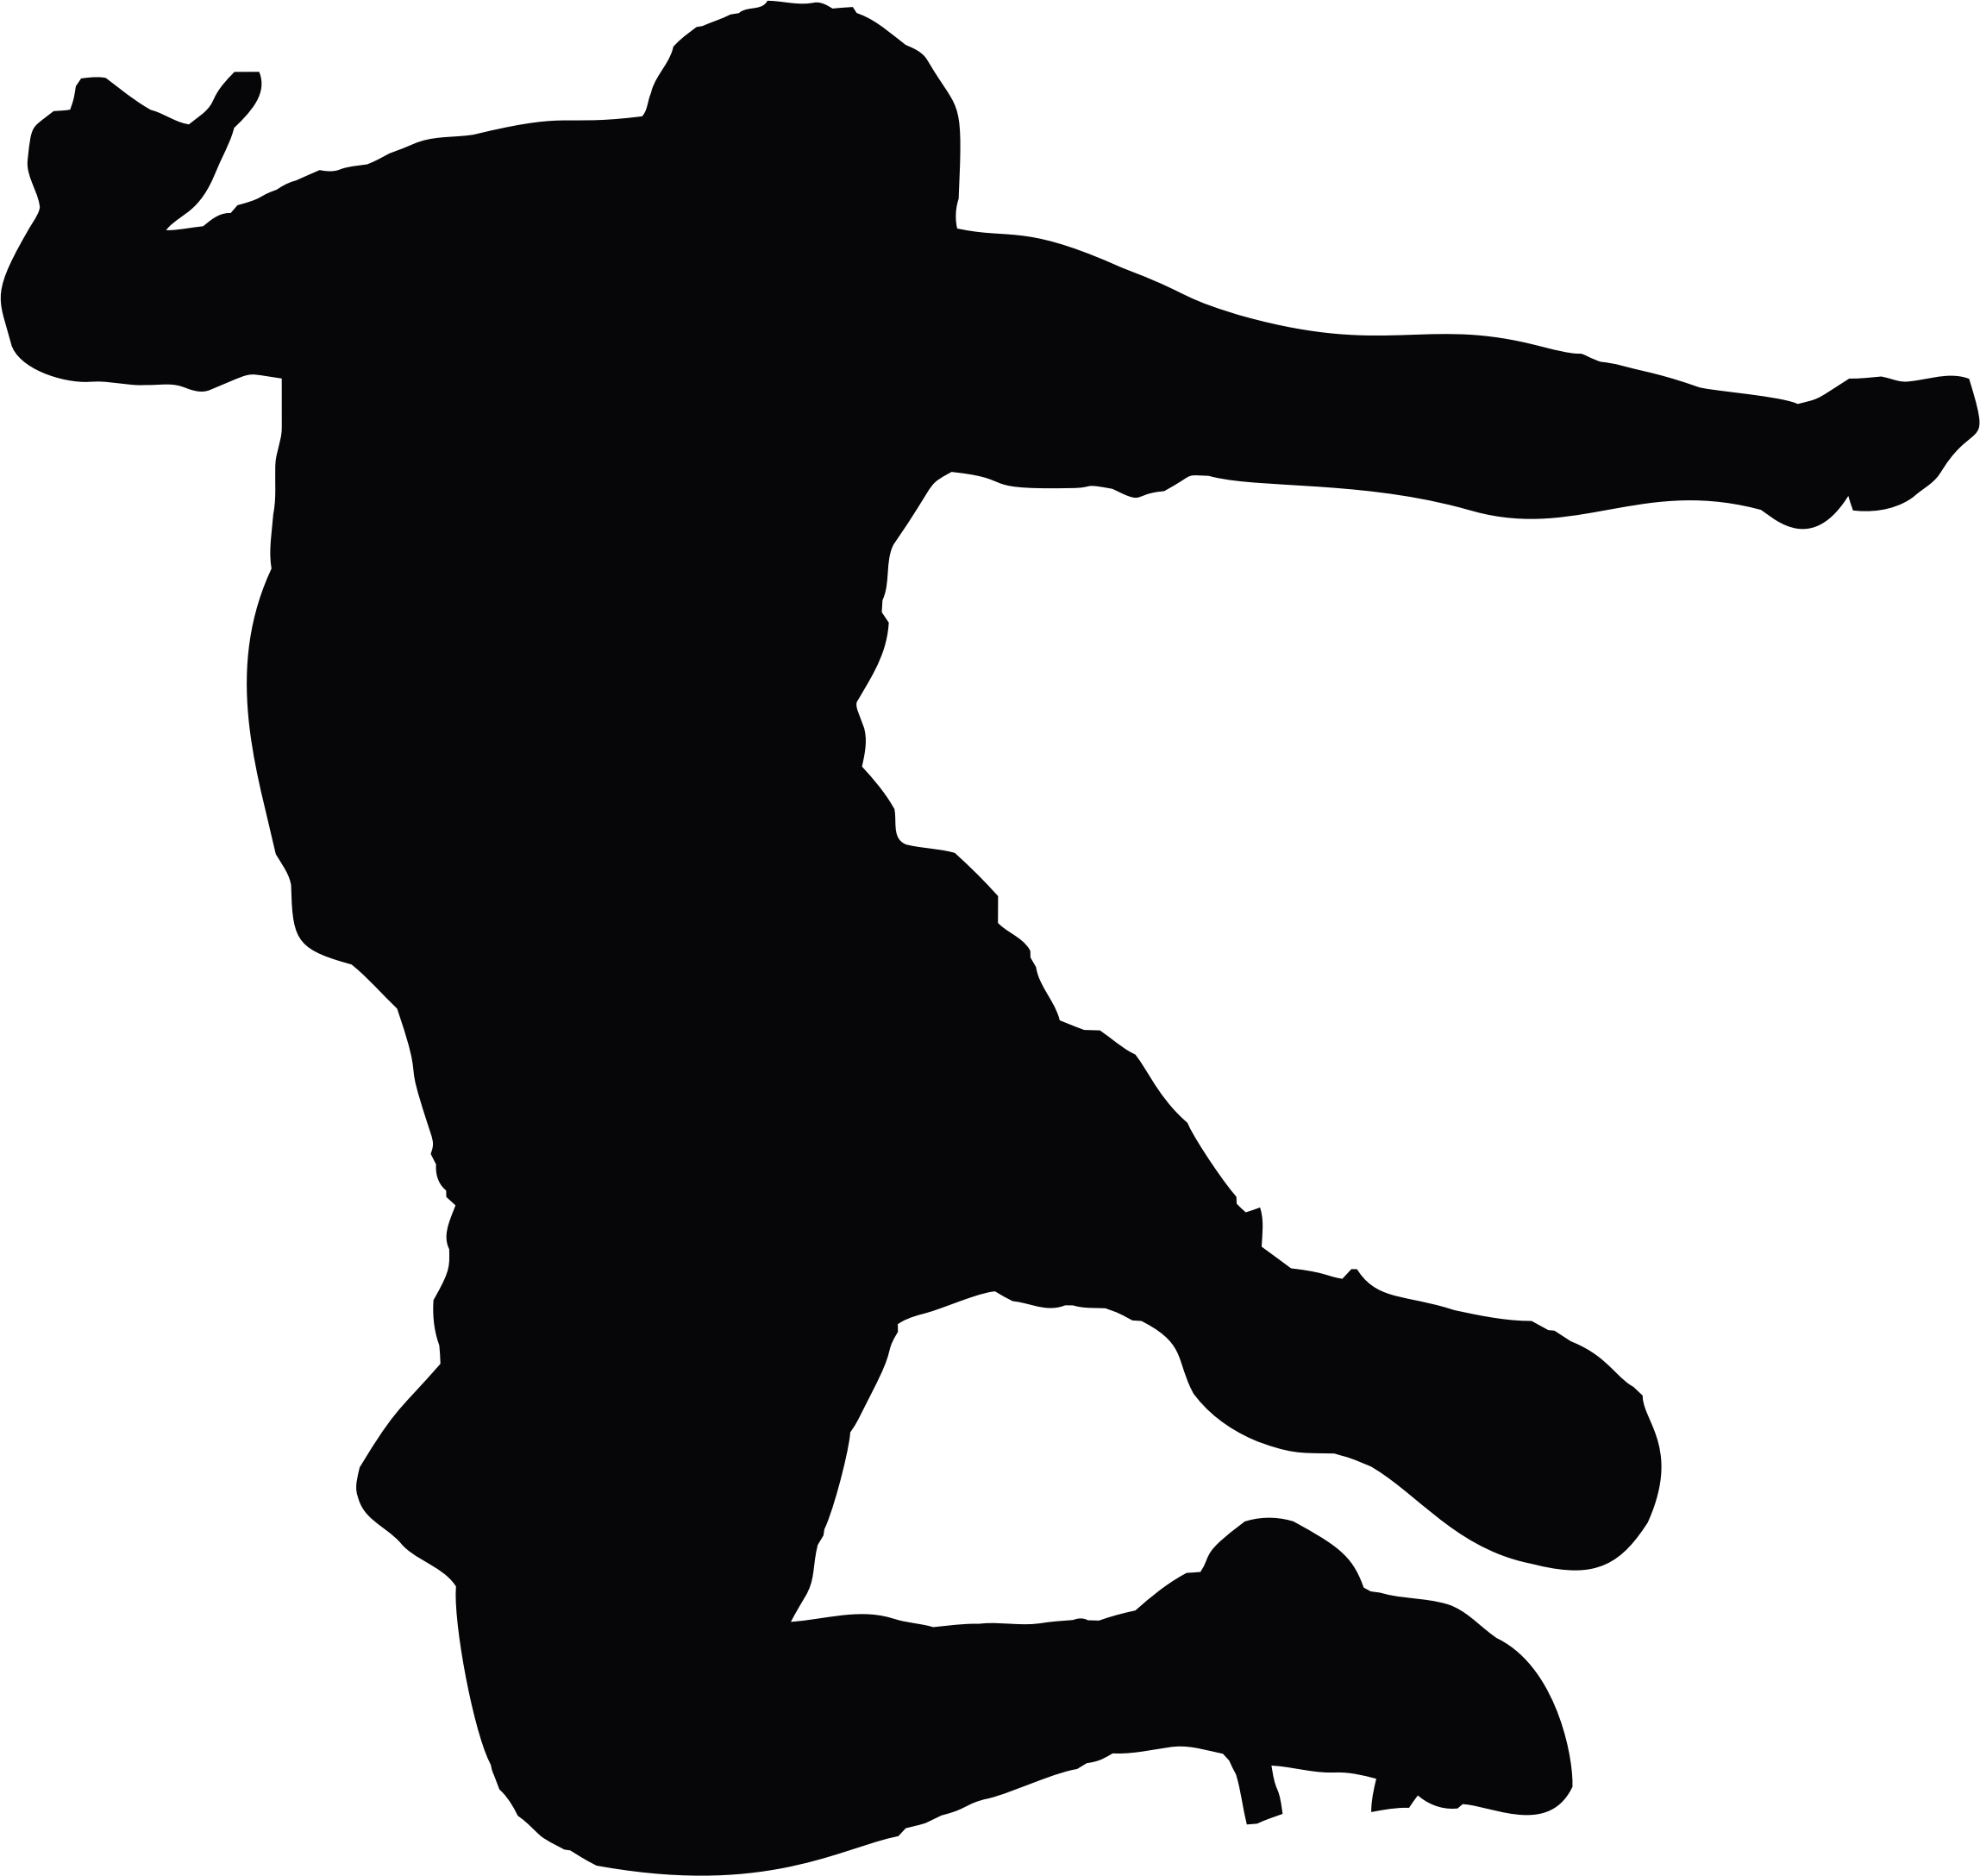 free clip art jumping silhouette - photo #8